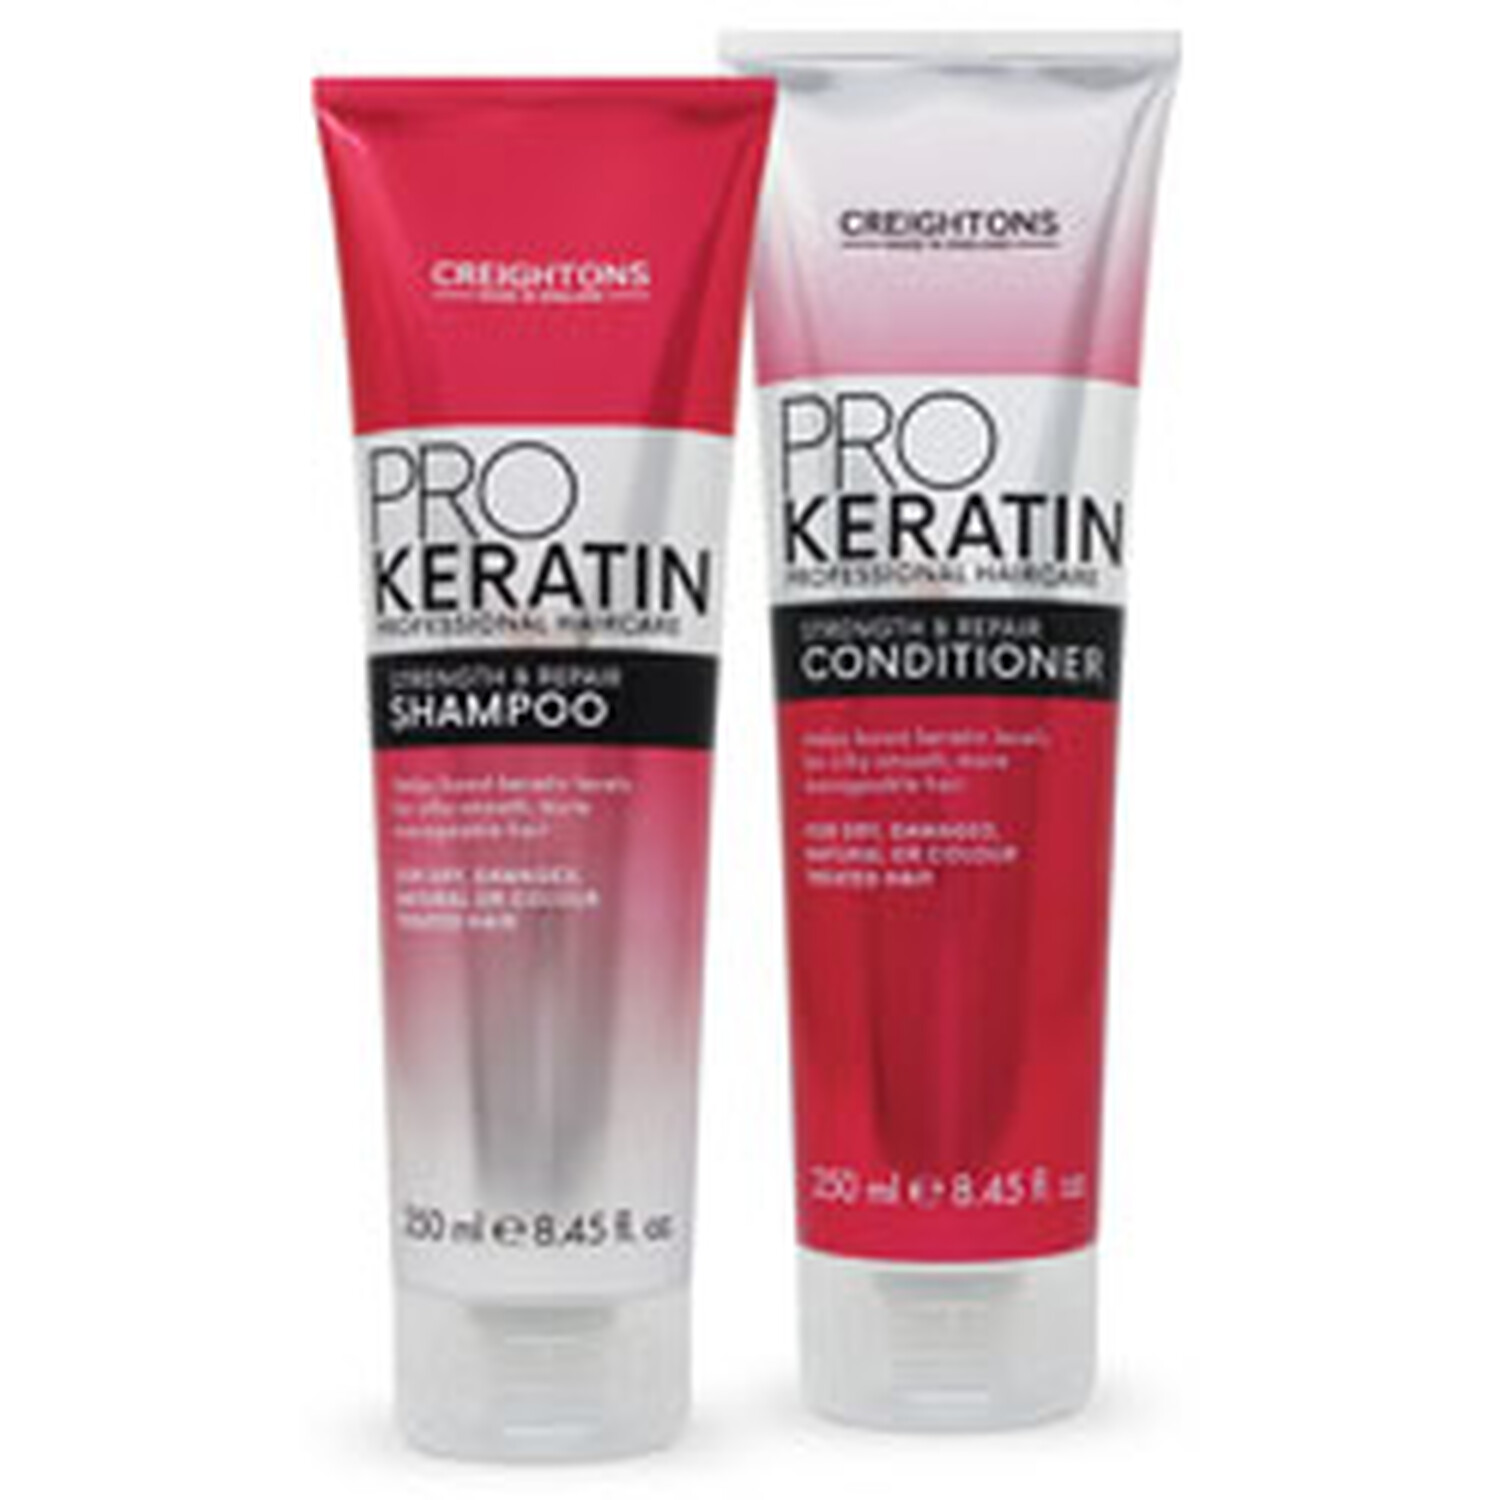 Pro Keratin Smooth & Strengthen Conditioner Image